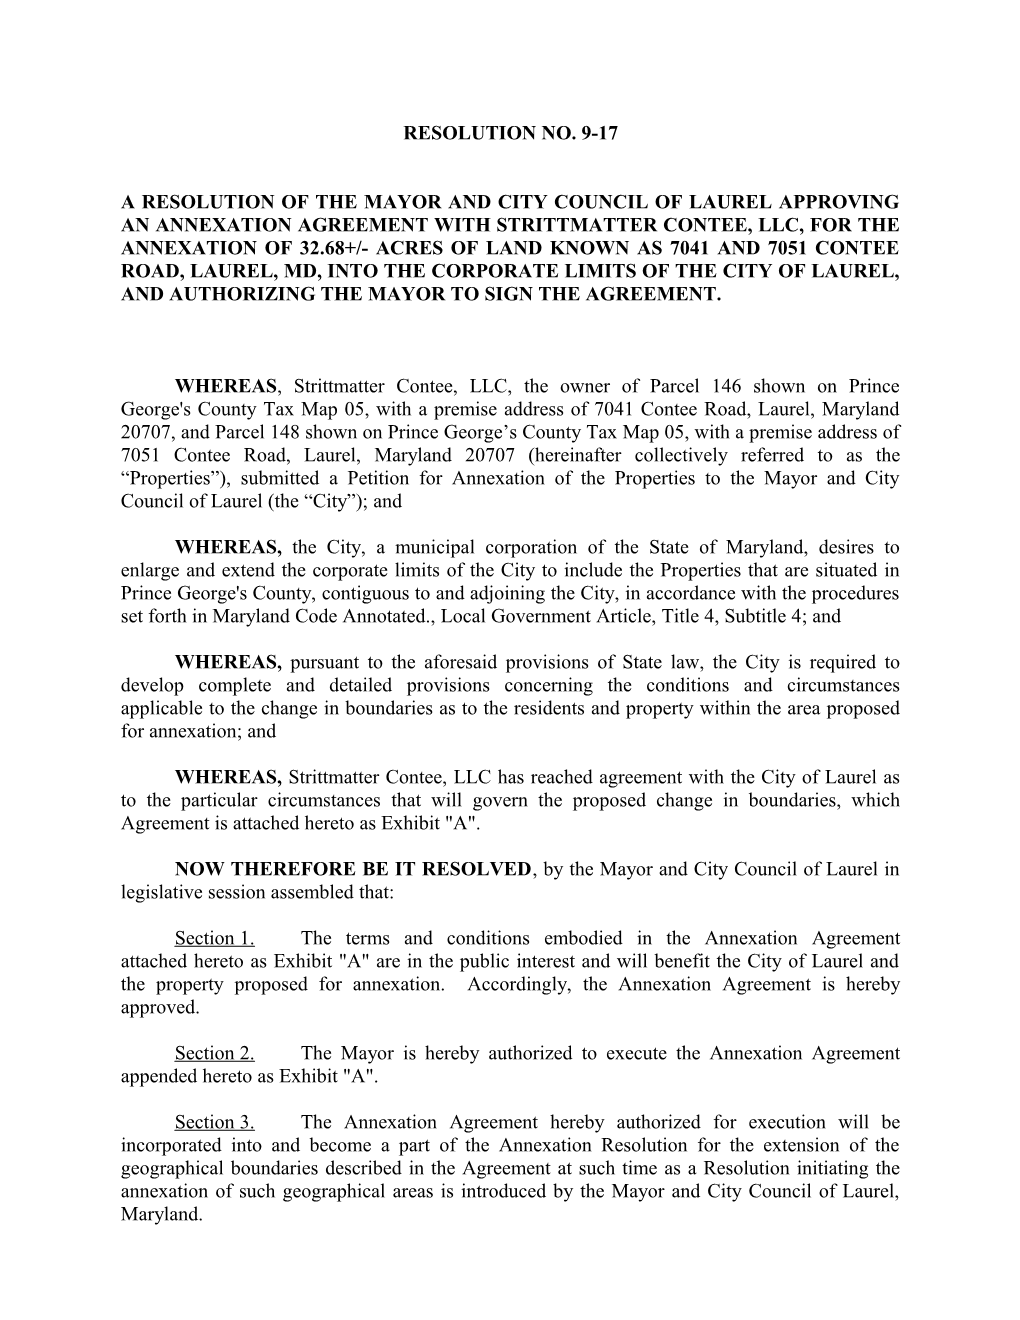 A Resolution of the Mayor and City Council of Laurelapproving an Annexationagreement With